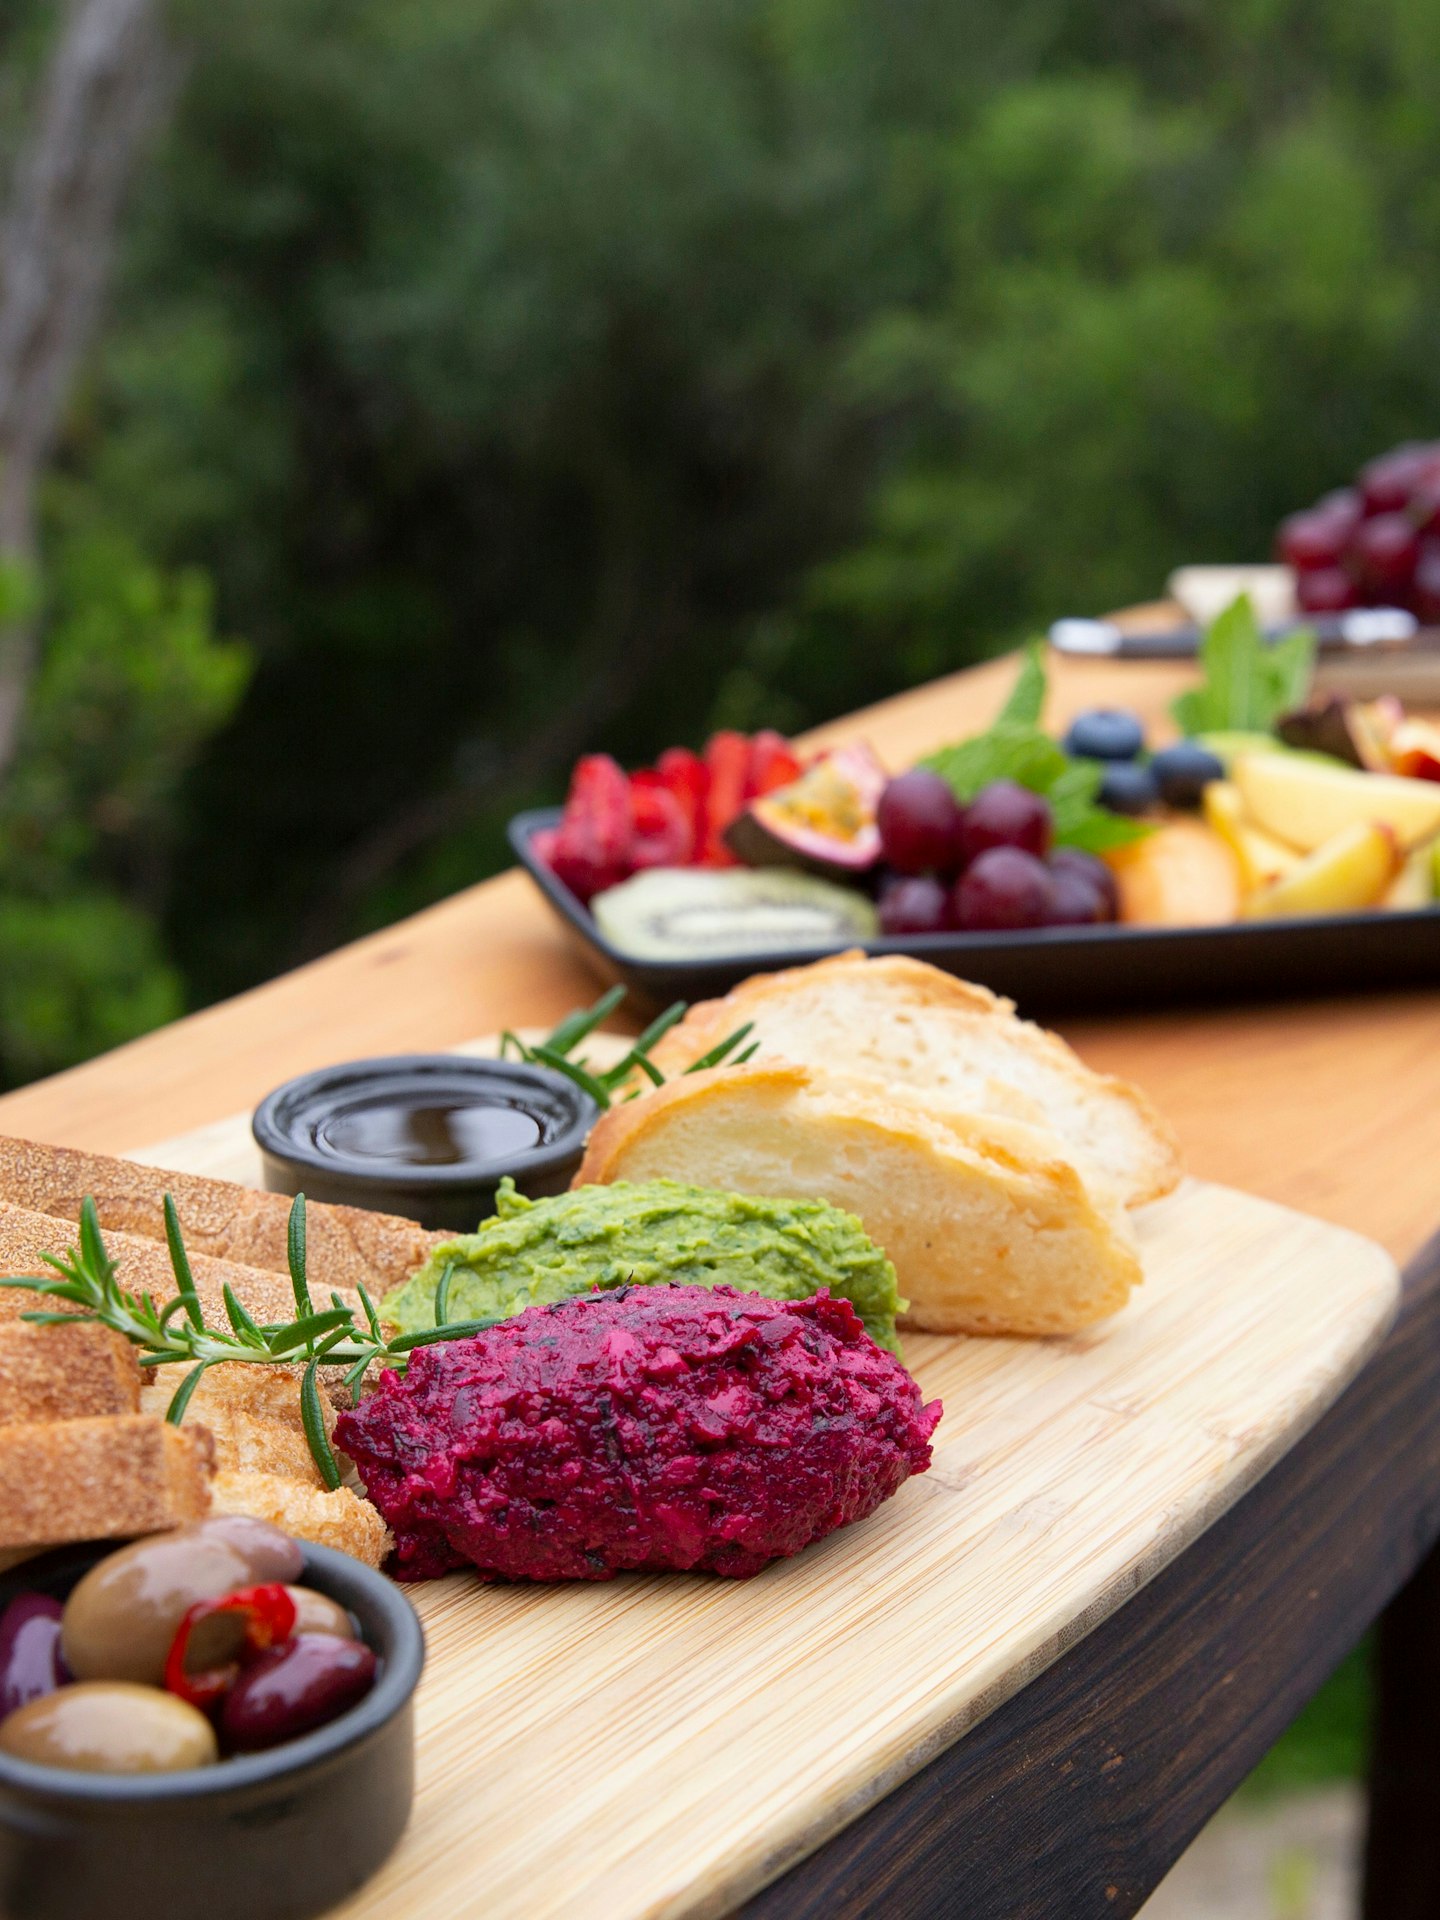 beautiful, colourful platters of food laid out on elevated wooden ledge with trees in background